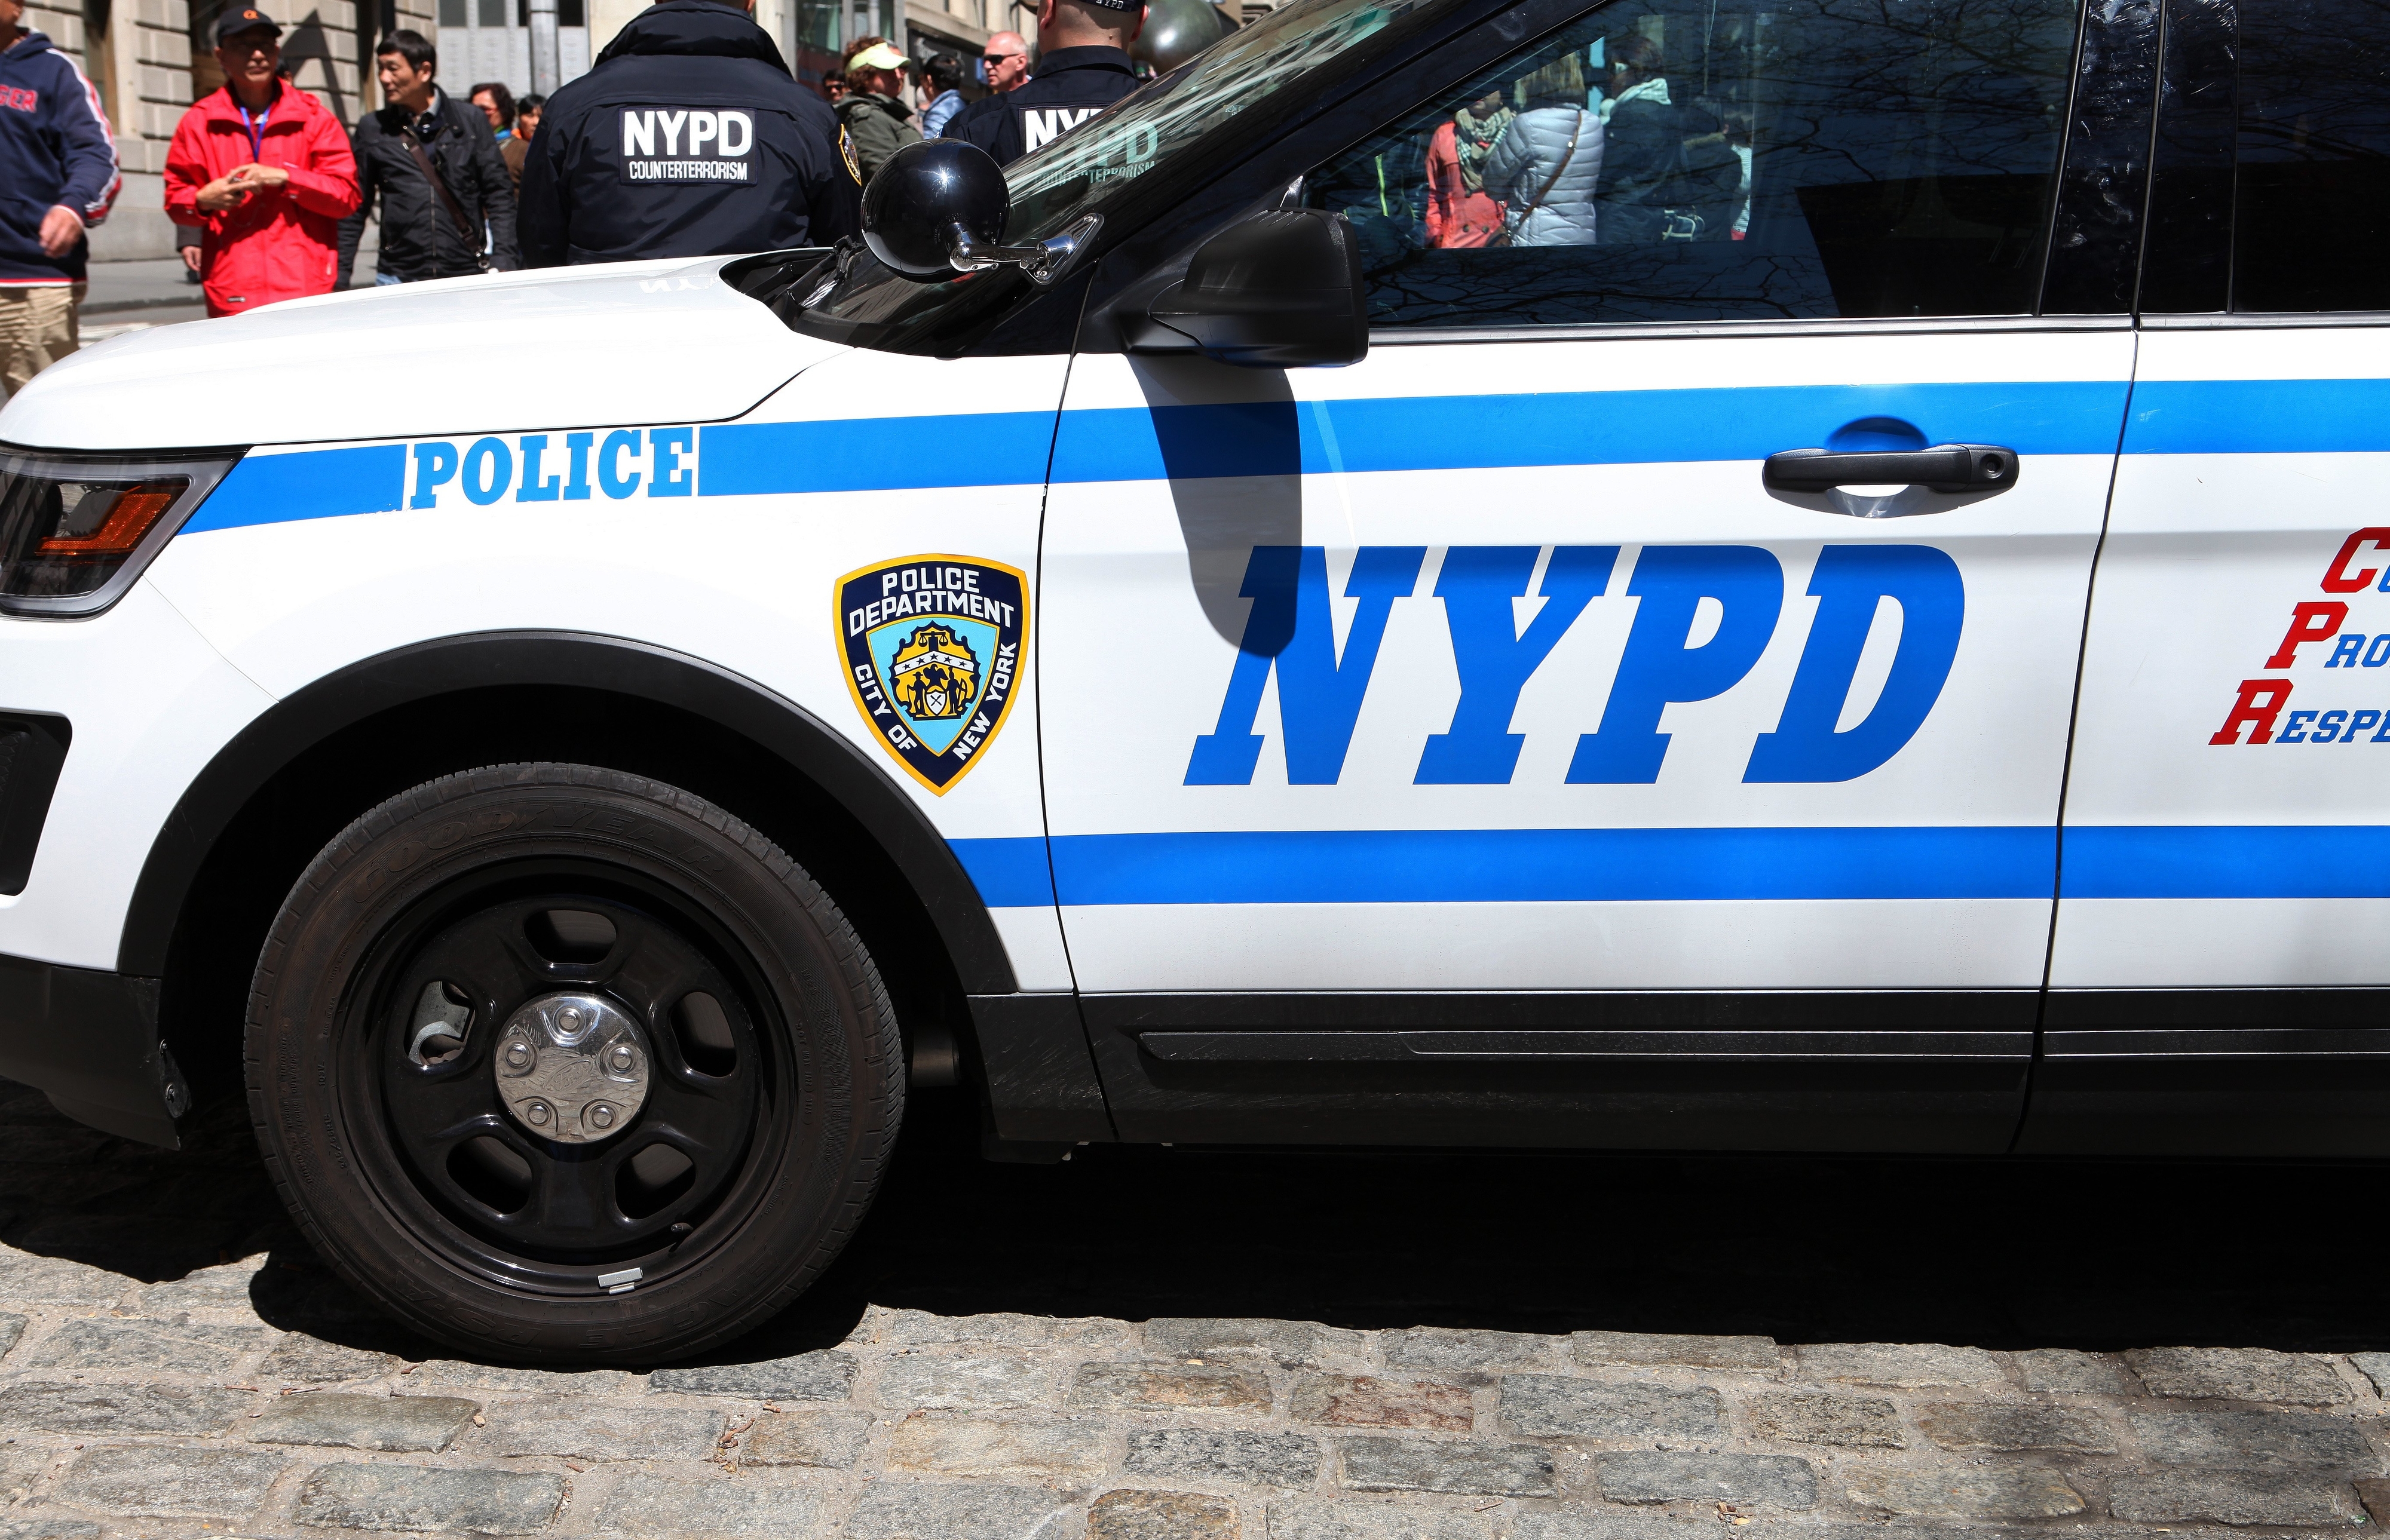 NYPD police vehicle on duty with a visible crowd in the background